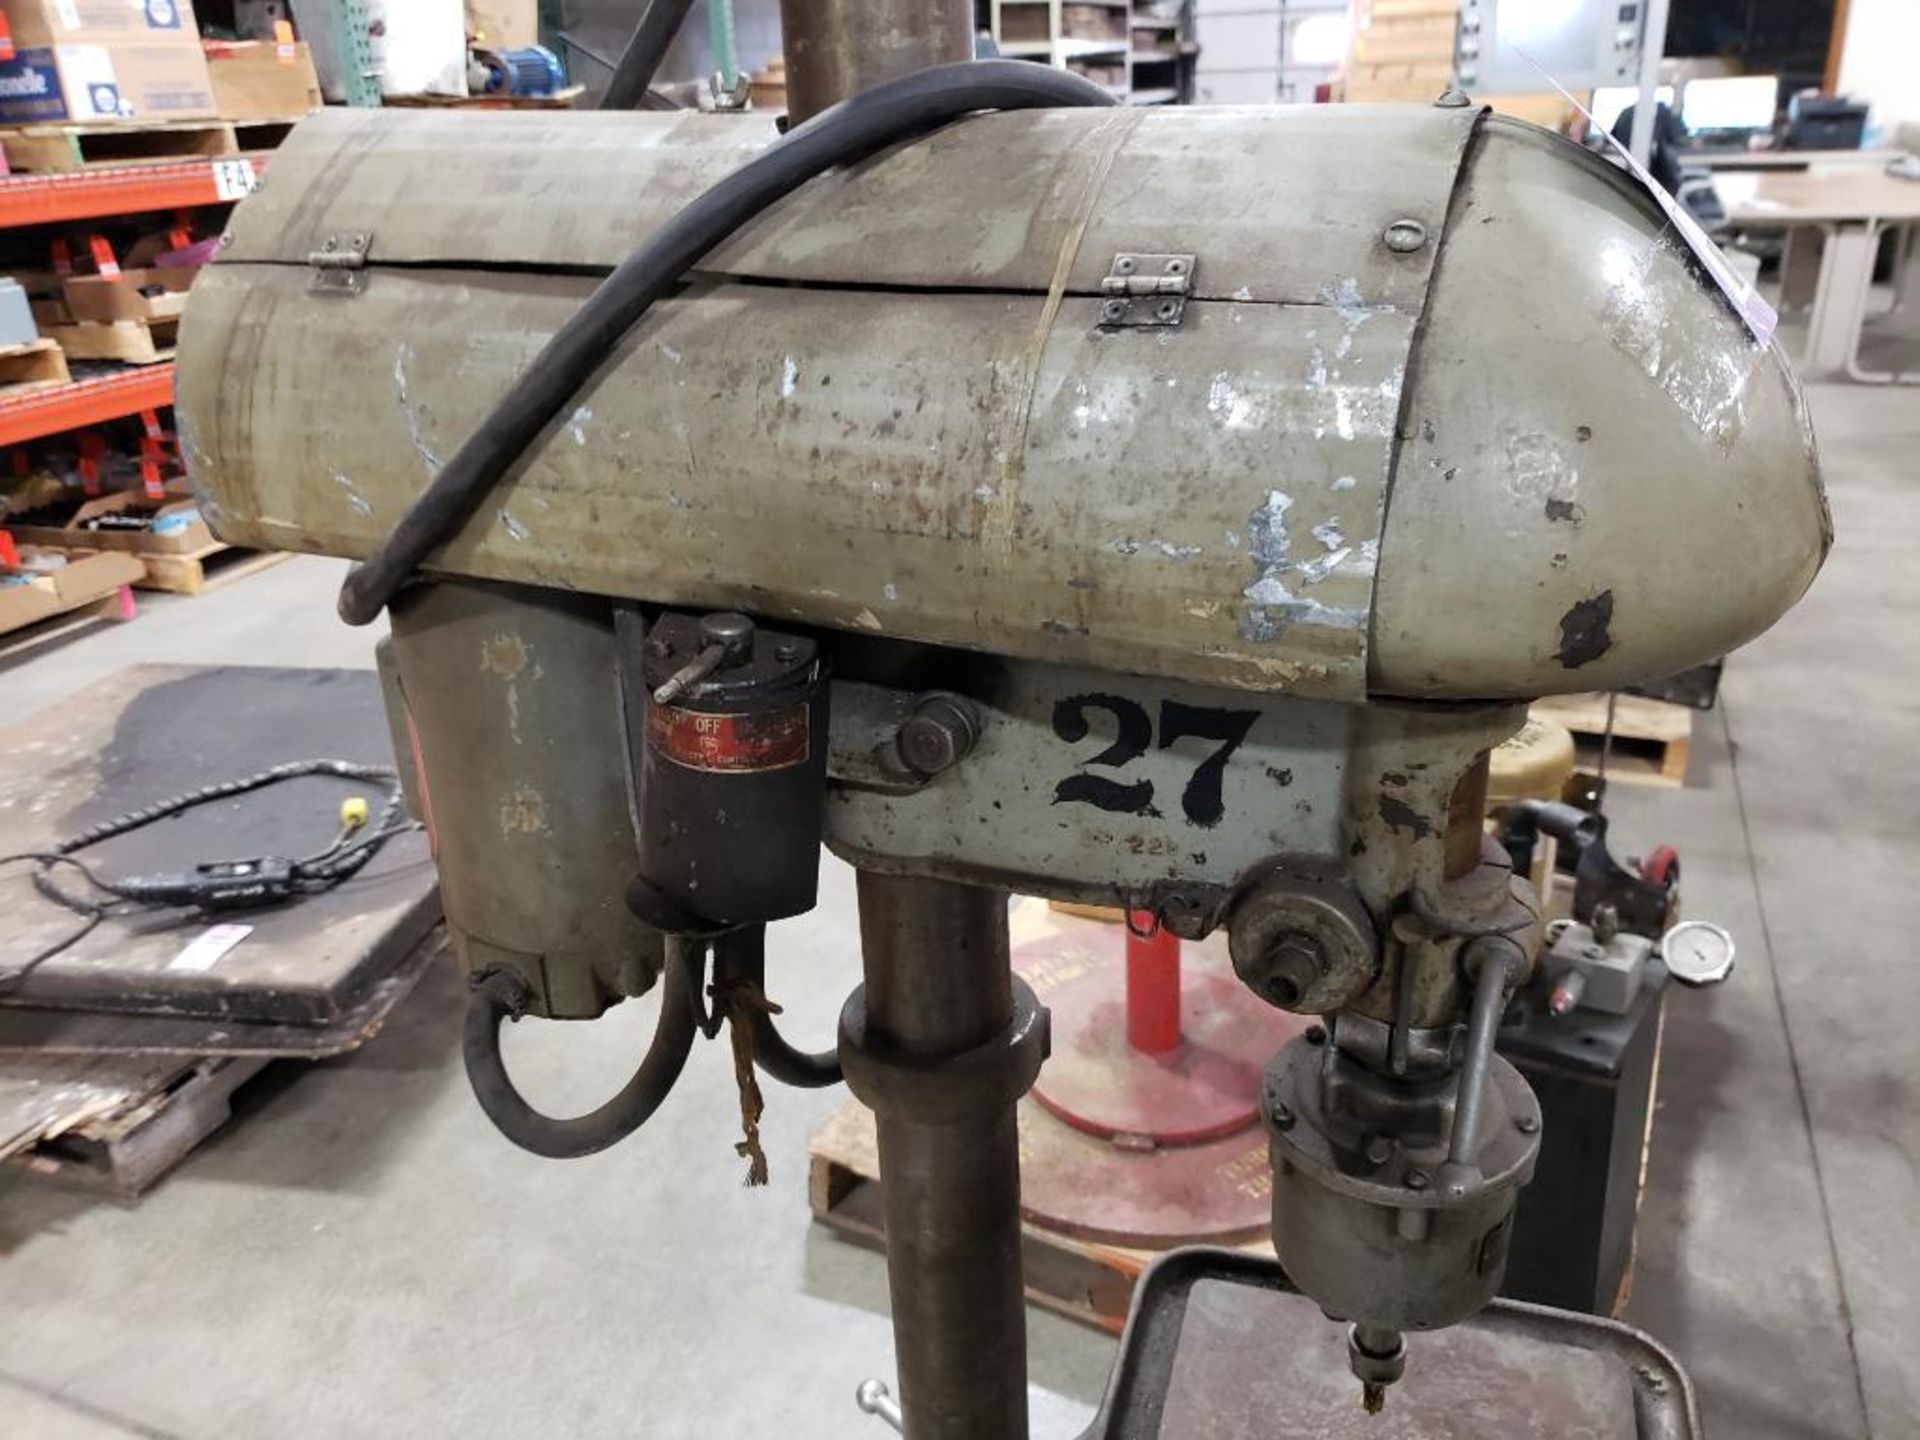 1/2hp Milwaukee Delta drill press with tapping head. 115v single phase. - Image 6 of 10